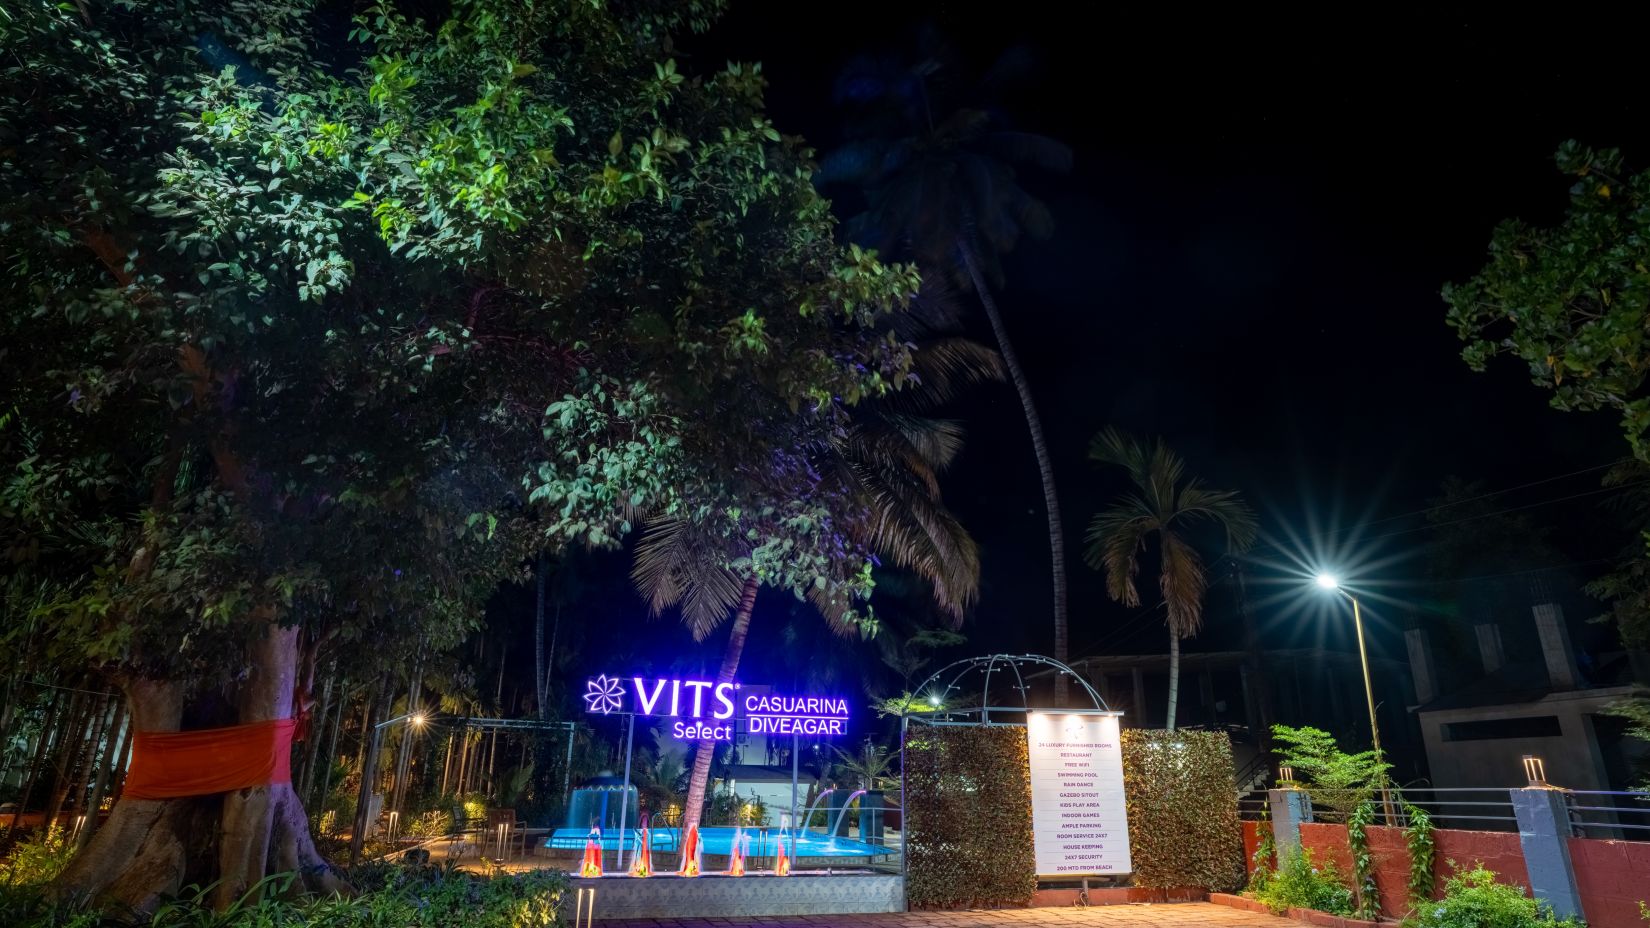 Signage of VITS Select Casuarina Diveagar in neon colours in the night with a large tree next to it